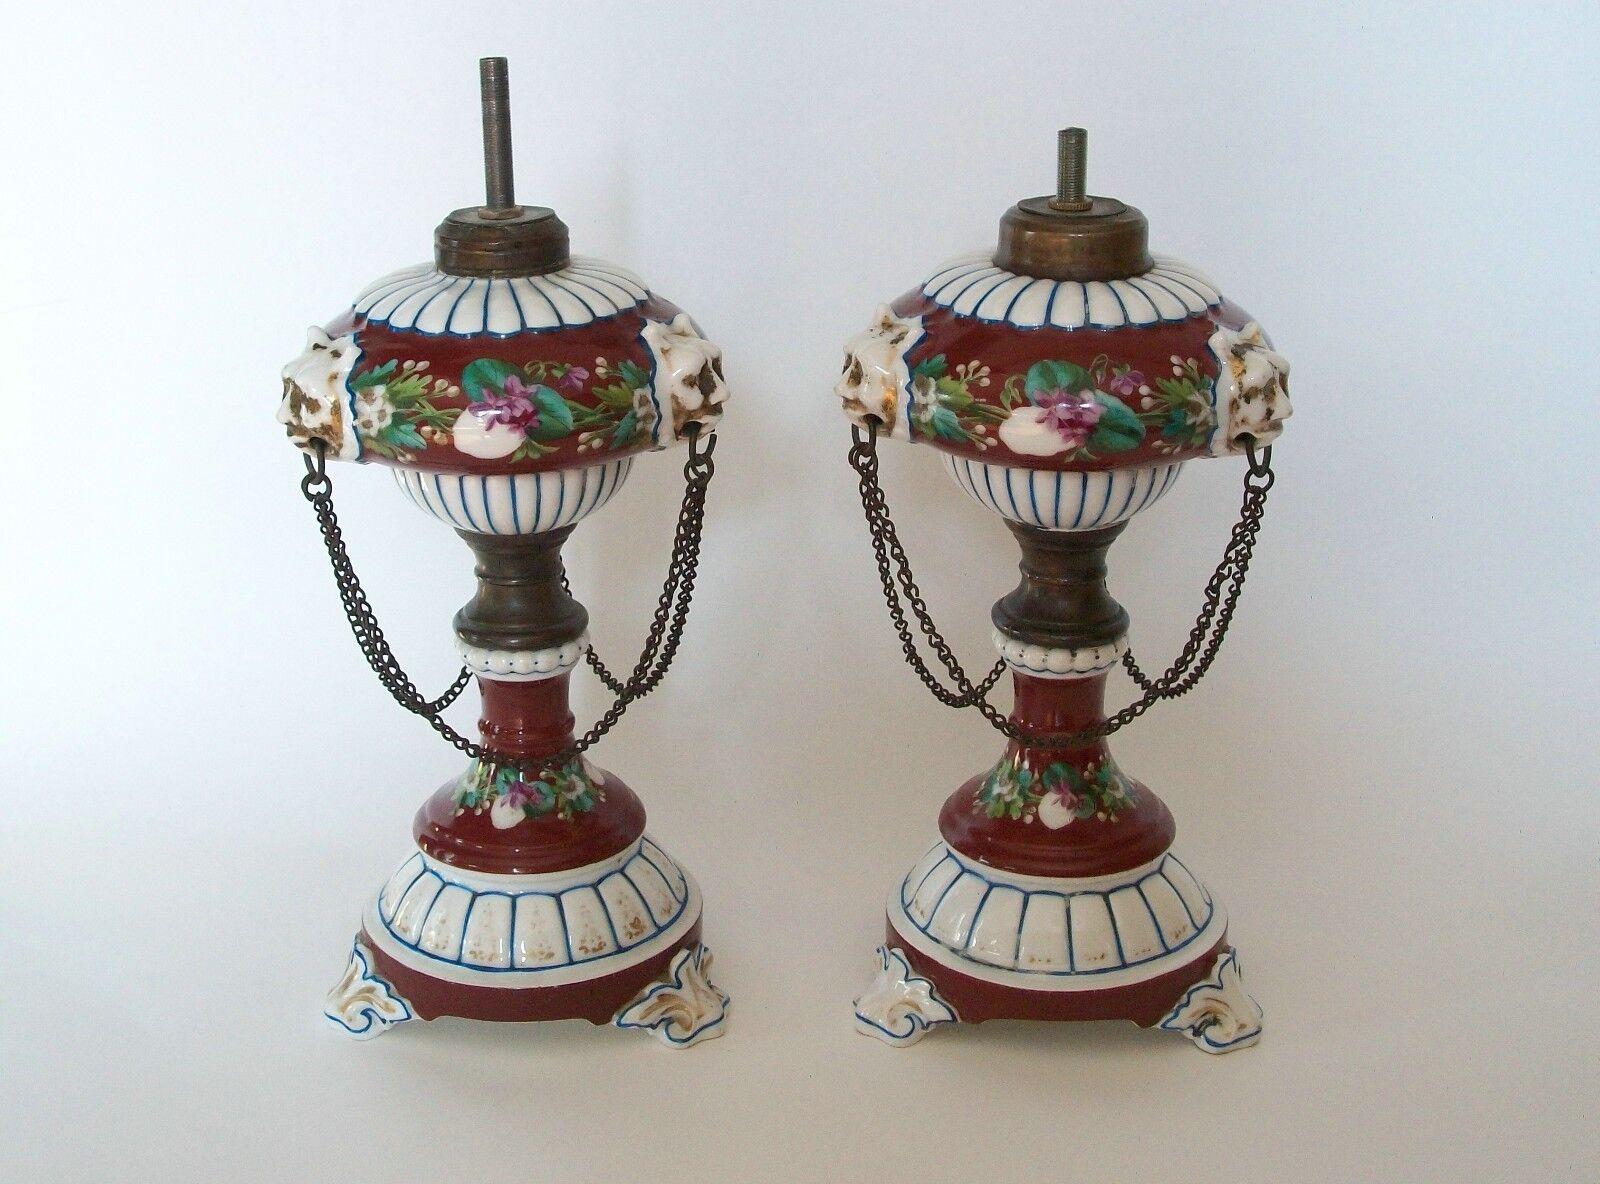 Hand-Crafted Victorian Hand Painted Ceramic Oil Lamps with Chain Swags & Lion Masks, C.1850 For Sale